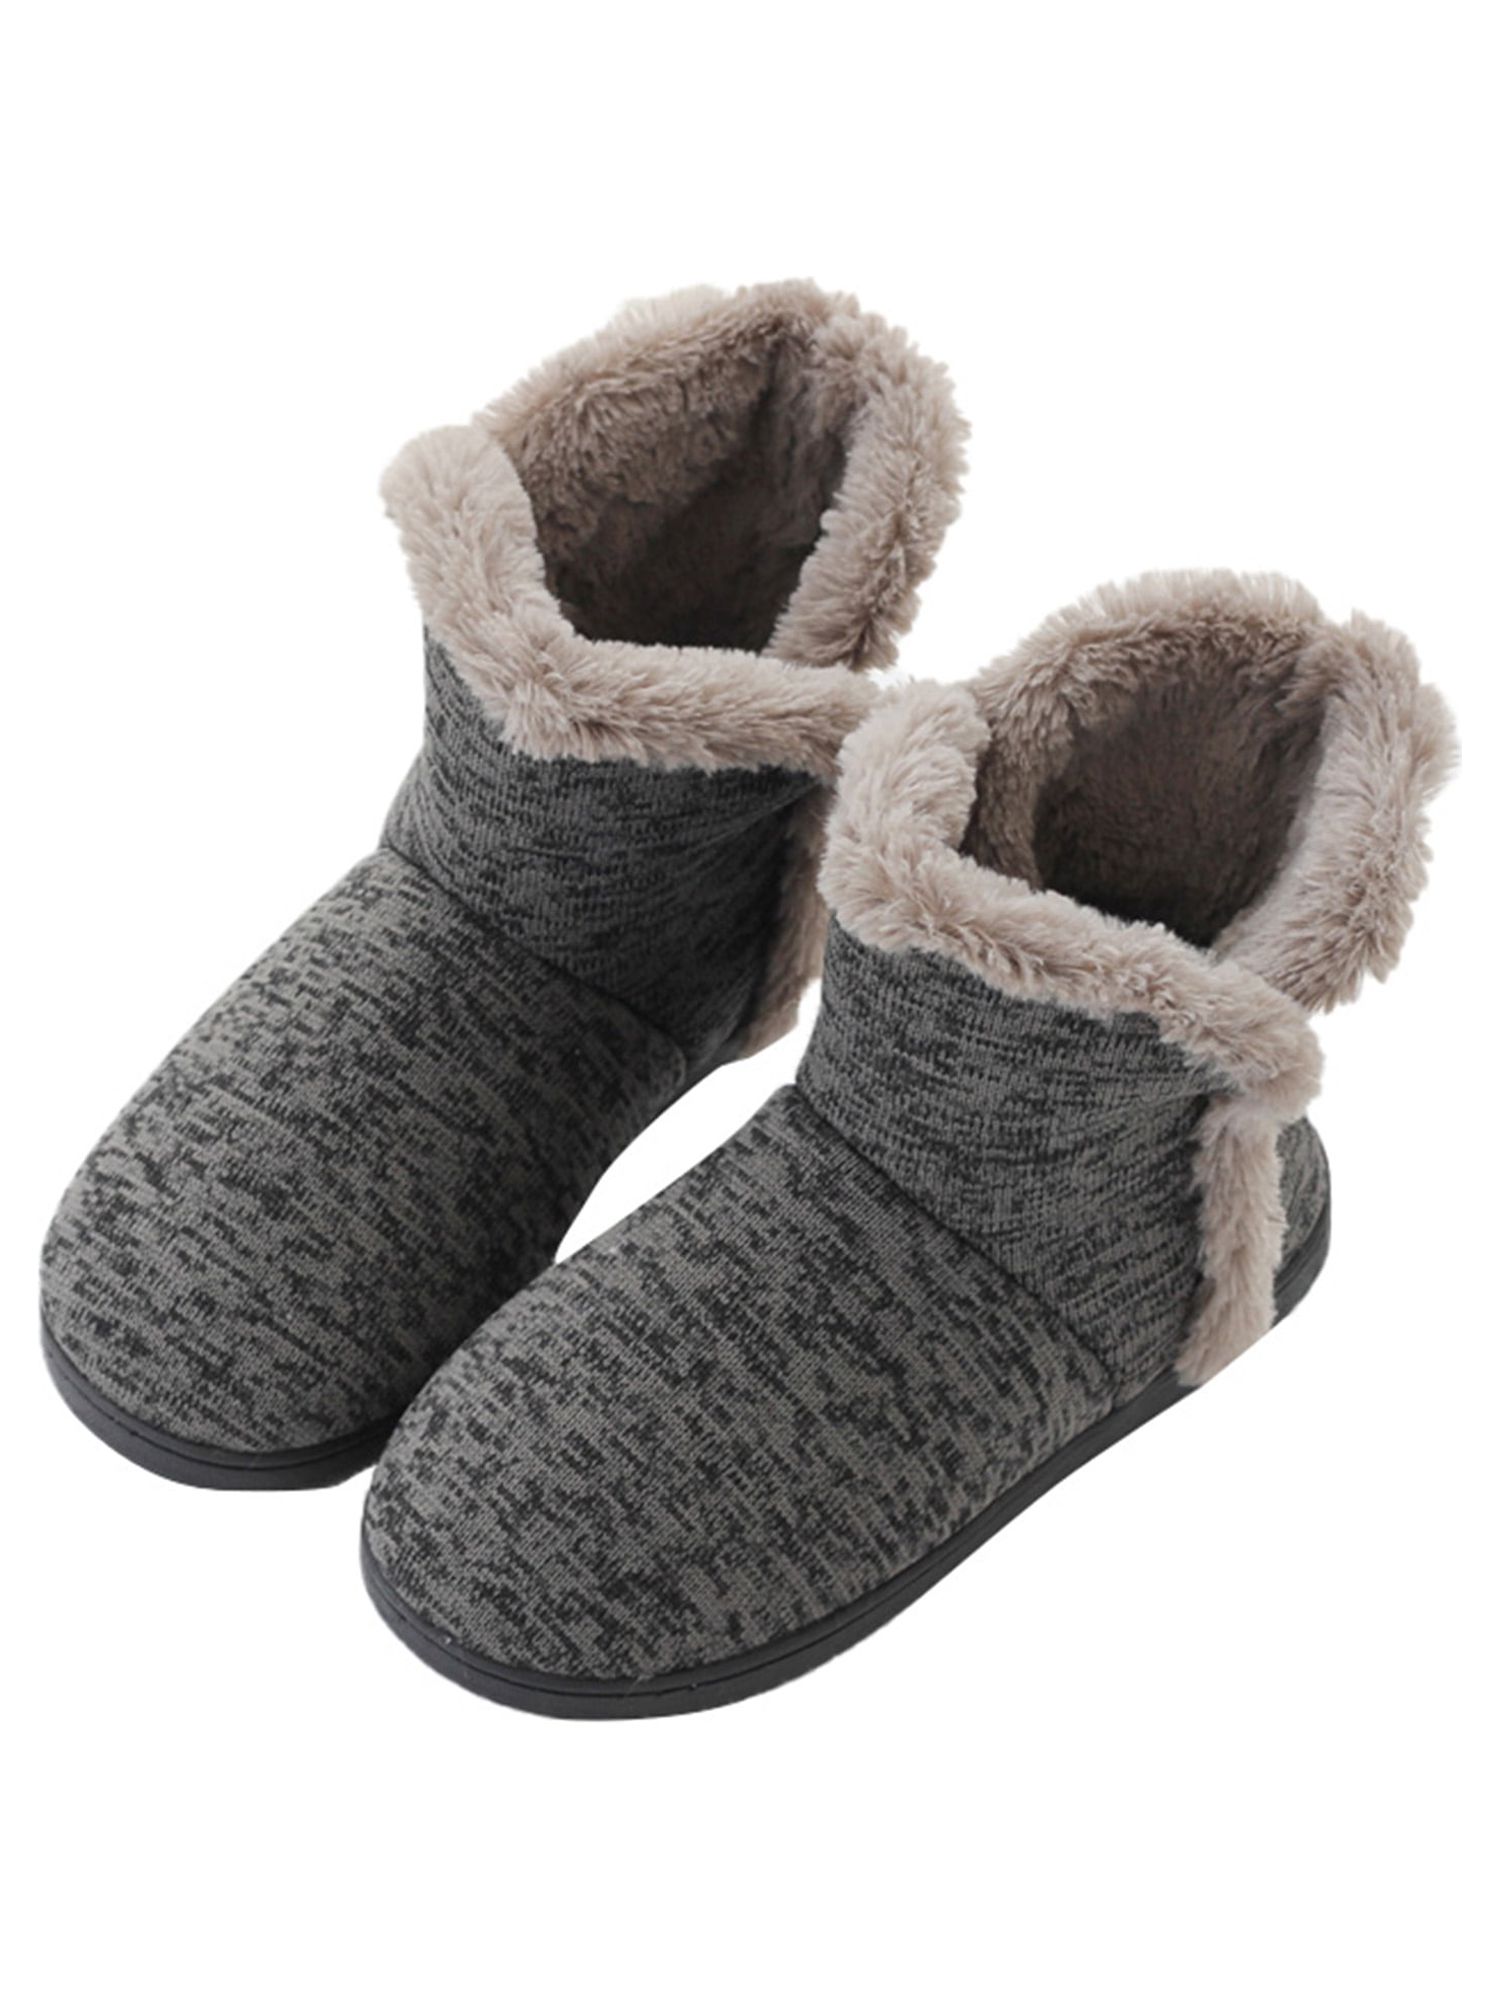 Mens Bootie Slippers Winter Boots Plush House Shoes WAY4 - image 4 of 4